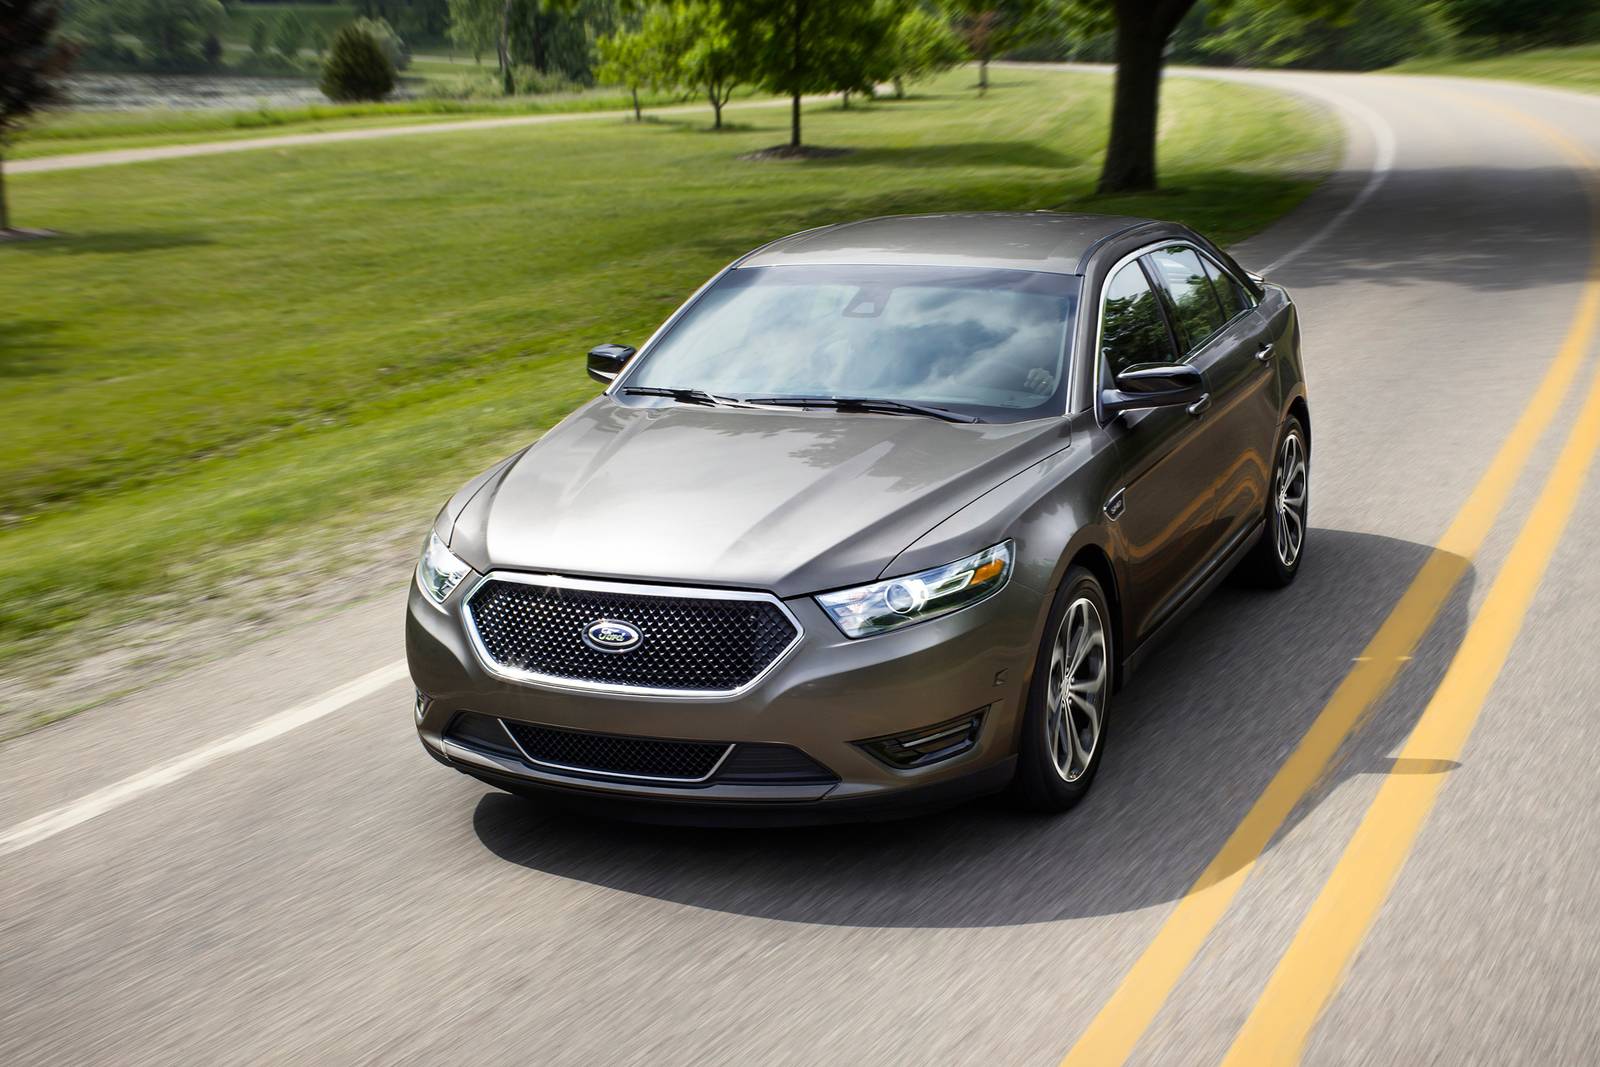 Used 2018 Ford Taurus SHO Review | Edmunds